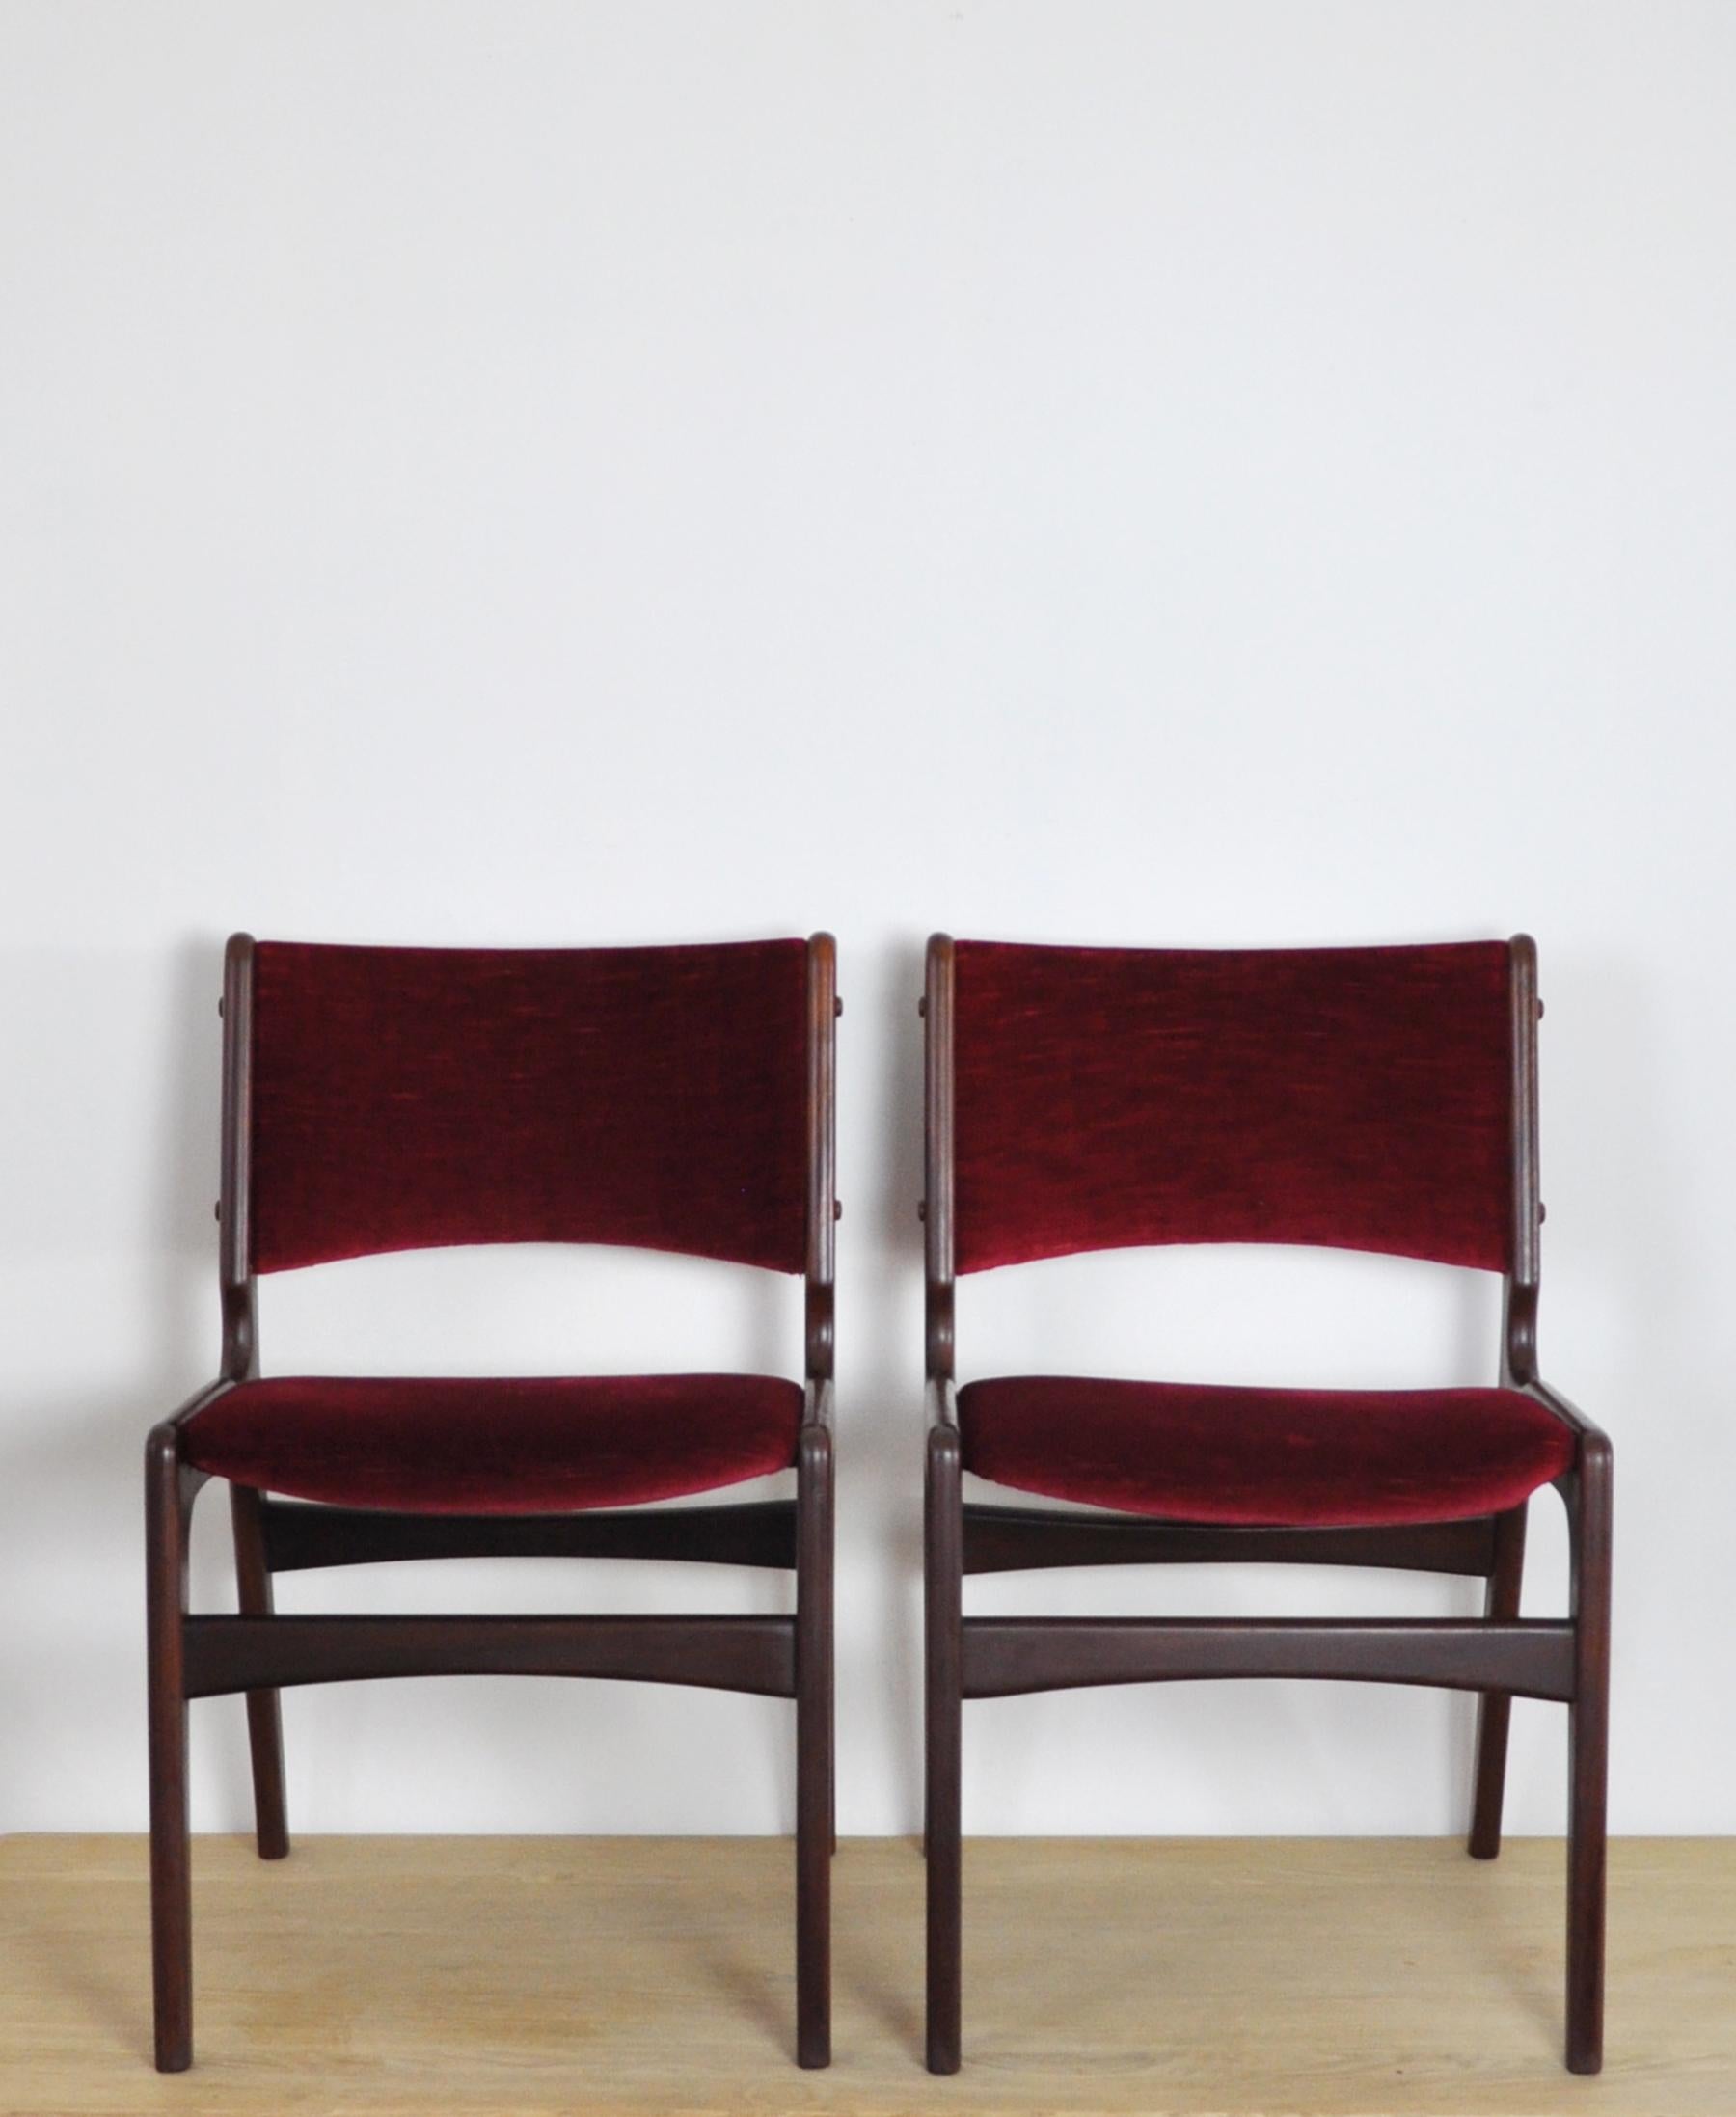 Set of Two Scandinavian Modern Dining Chairs in Solid Teak by Erik Buch In Good Condition For Sale In Vordingborg, DK